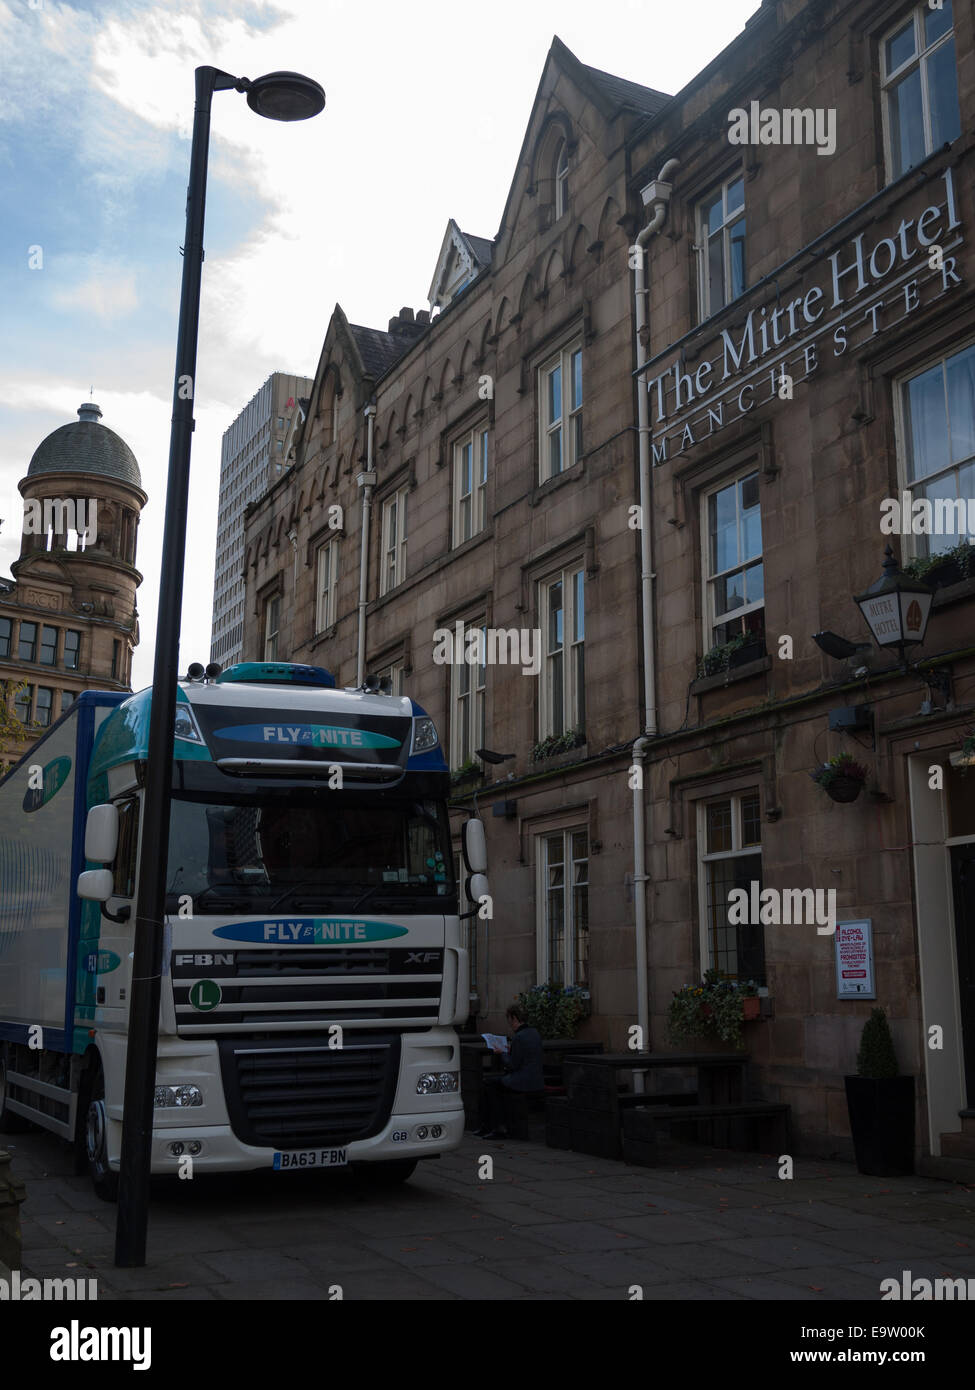 Large truck parked outside The Mitre Hotel, Manchester Stock Photo